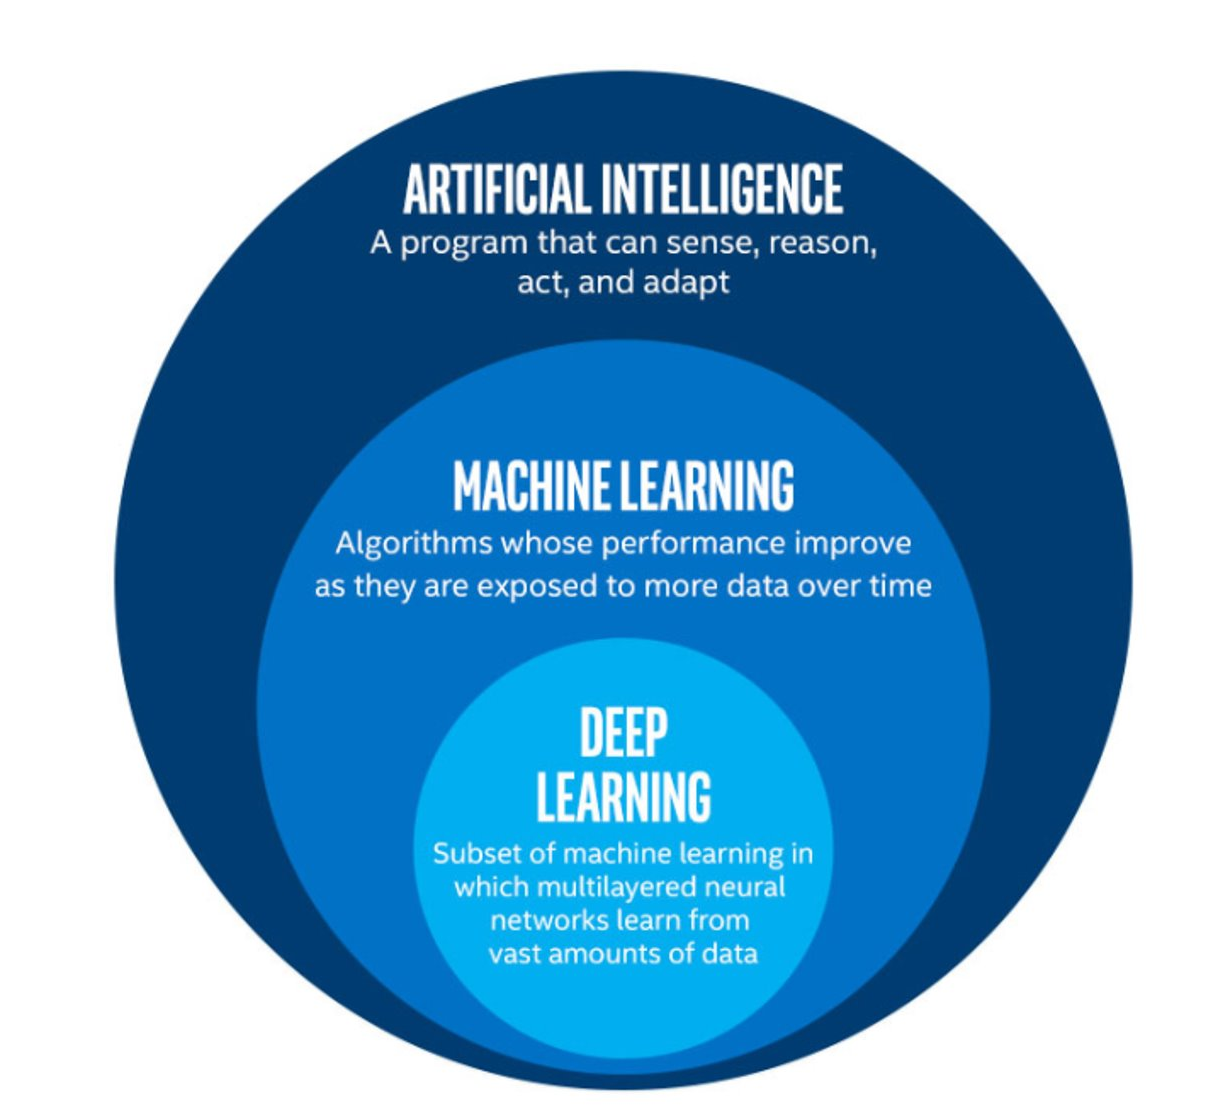 An infographic showing some of the relationships between AI, ML, and DL